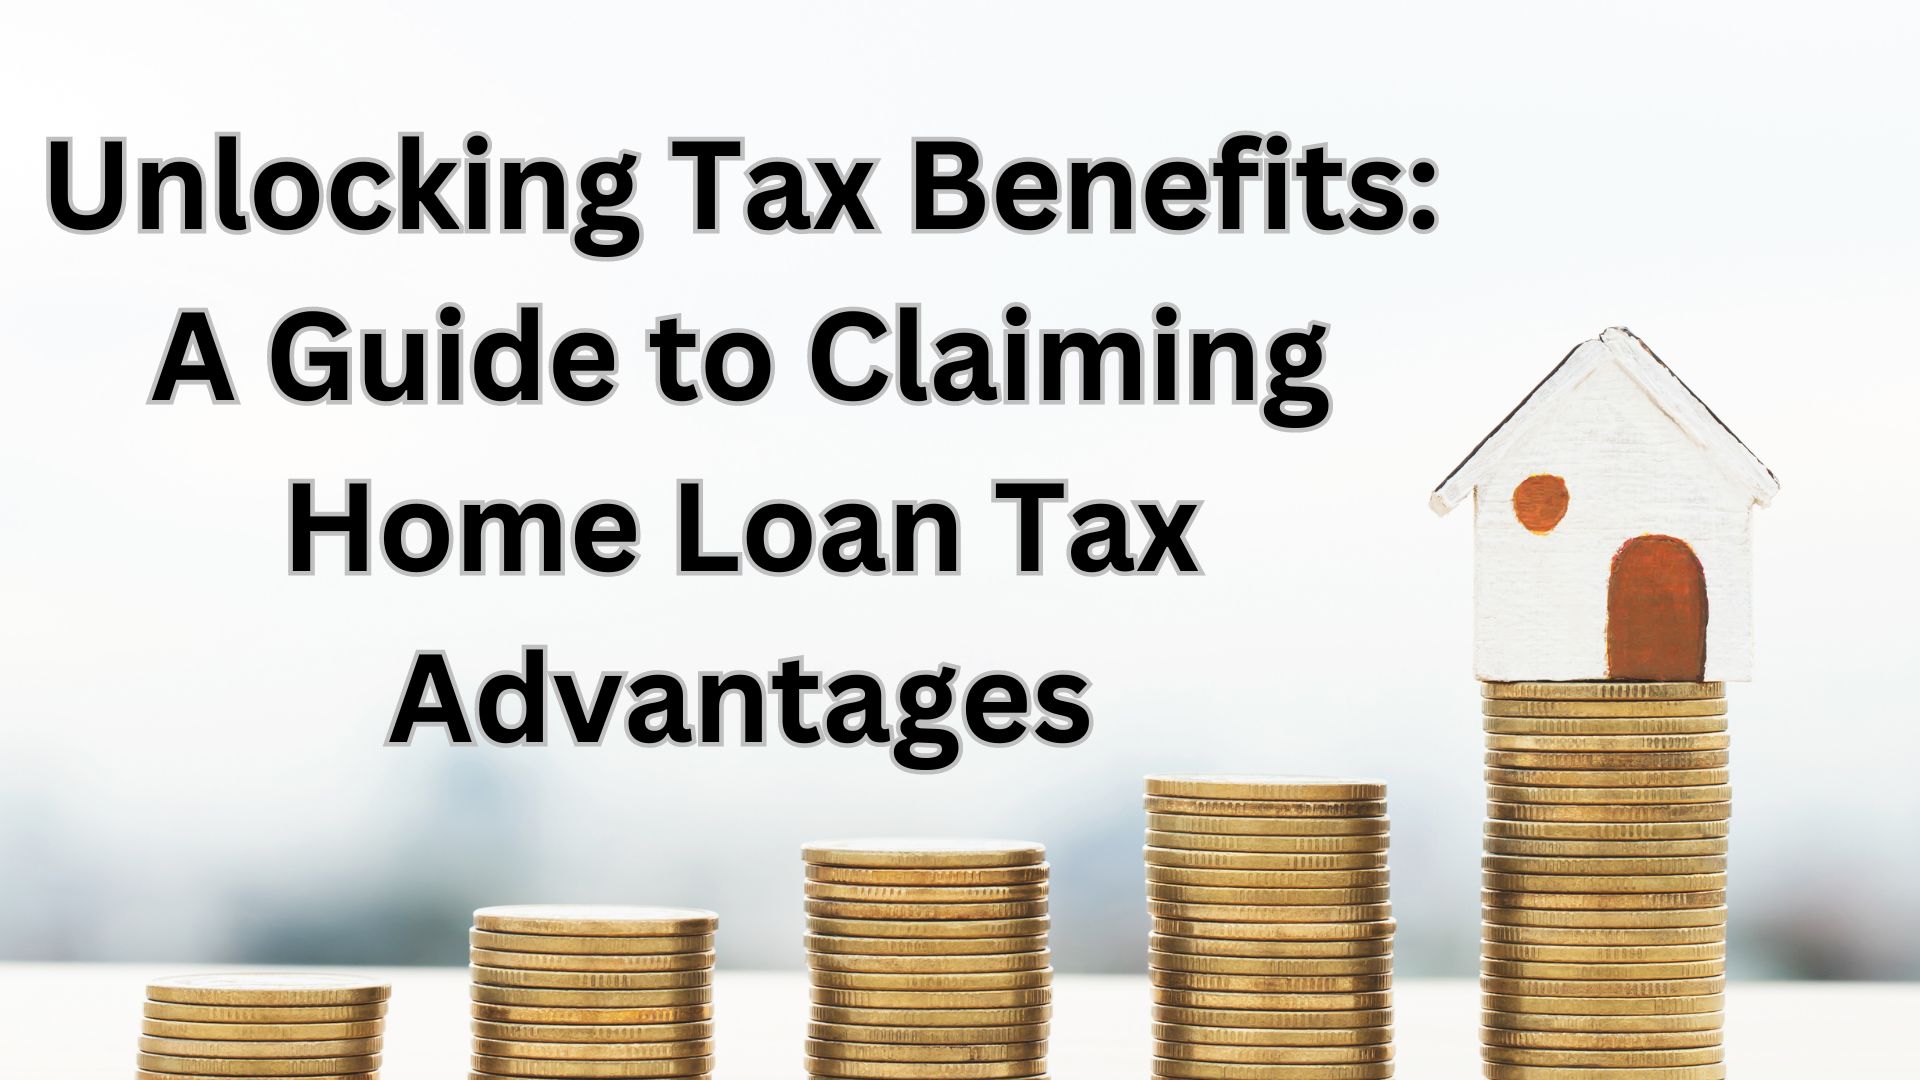 Unlocking Tax Benefits: A Guide to Claiming Home Loan Tax Advantages